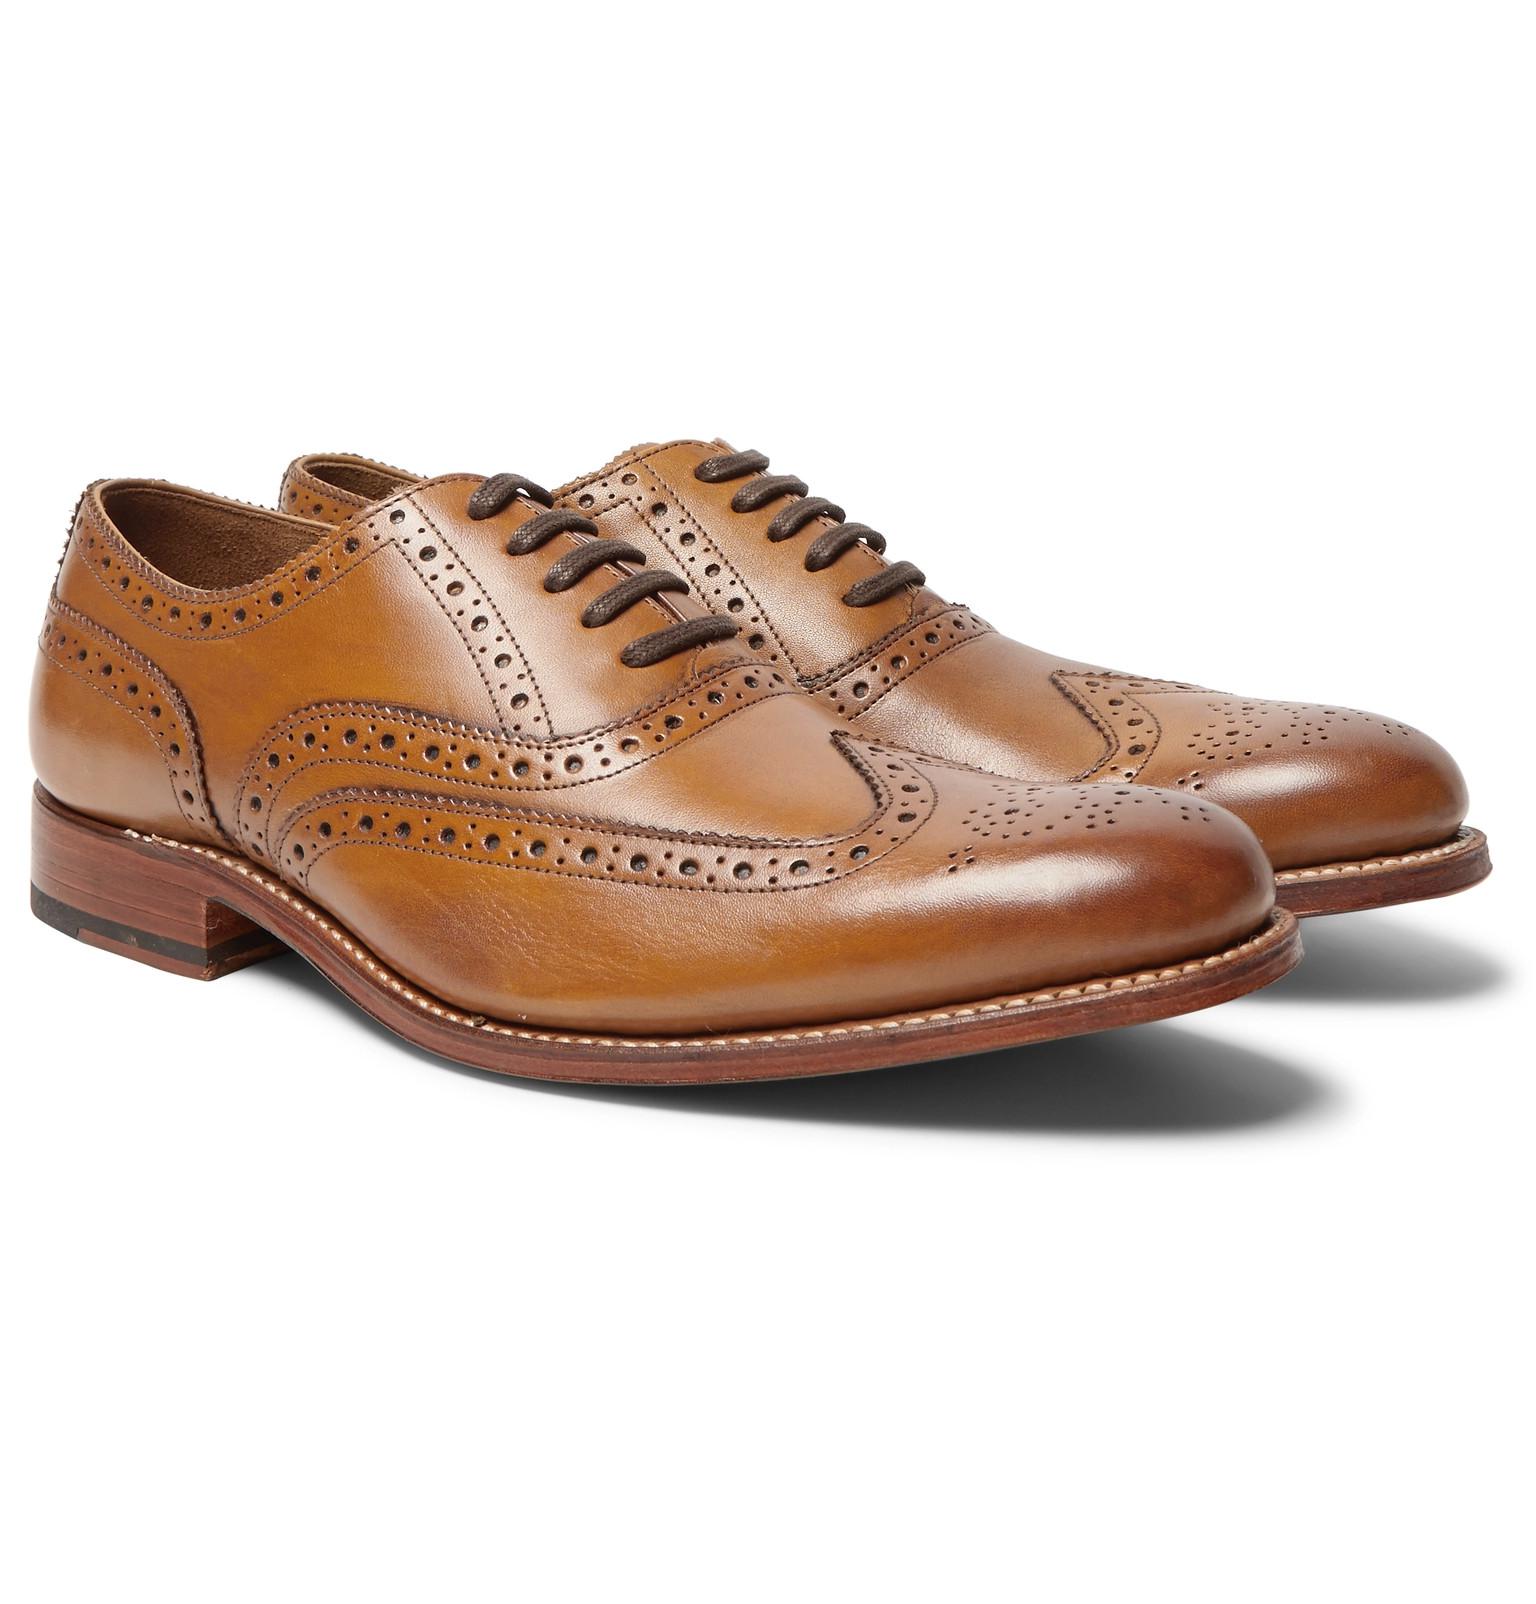 Grenson Dylan Leather Wingtip Brogues in Brown for Men - Lyst